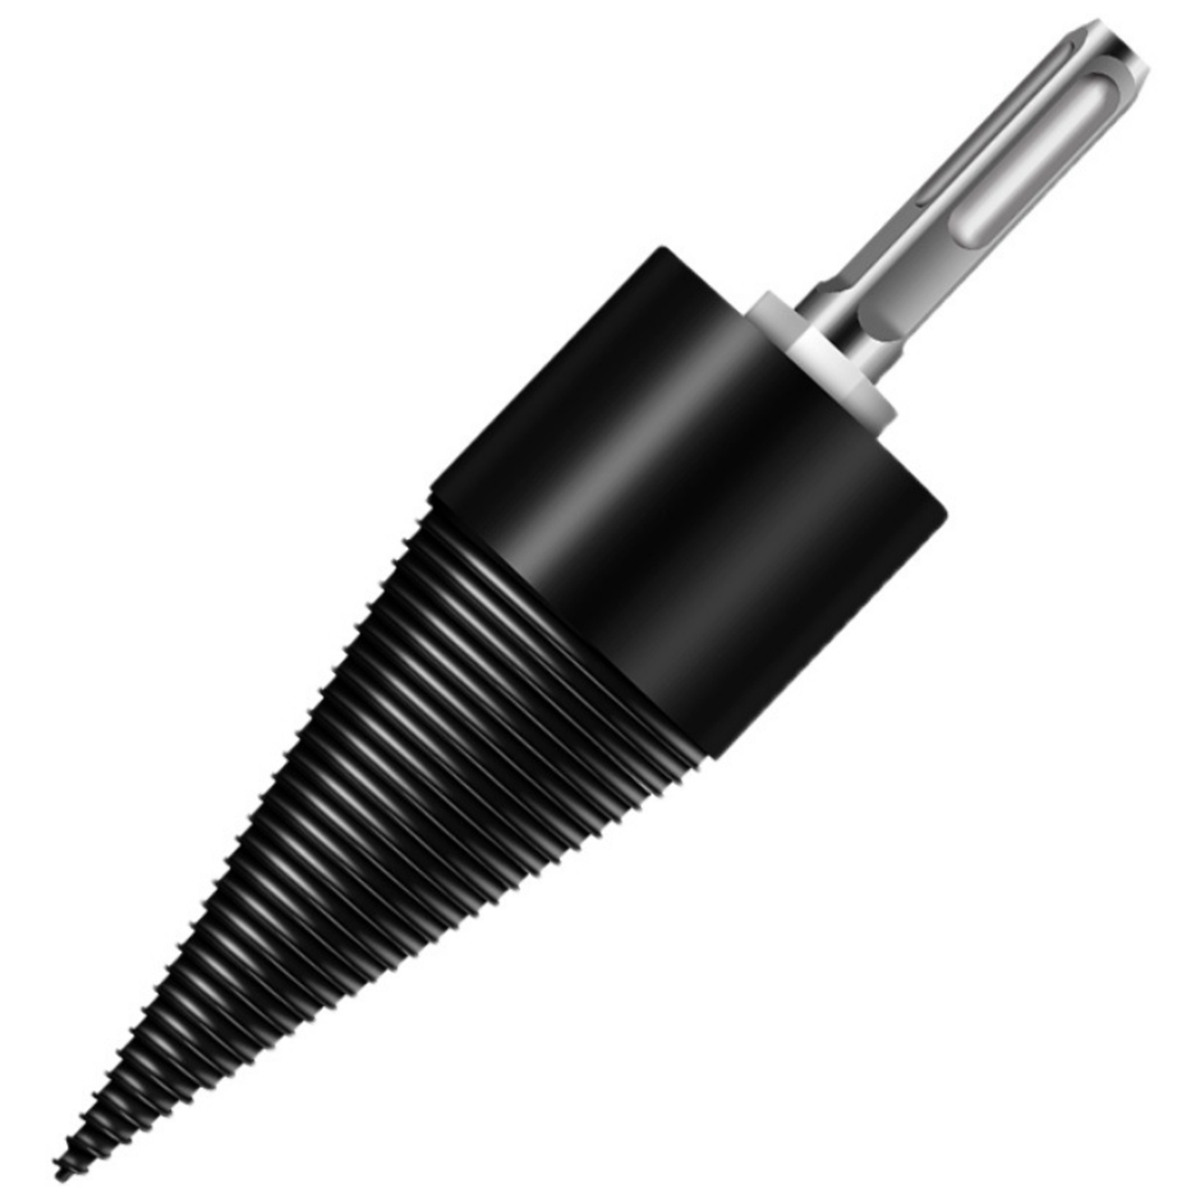 5-PCS-42mm32mm-Firewood-Splitter-Drill-RoundHexTriangleWrench-Shank-Wood-Cone-Reamer-Punch-Driver-St-1962068-8